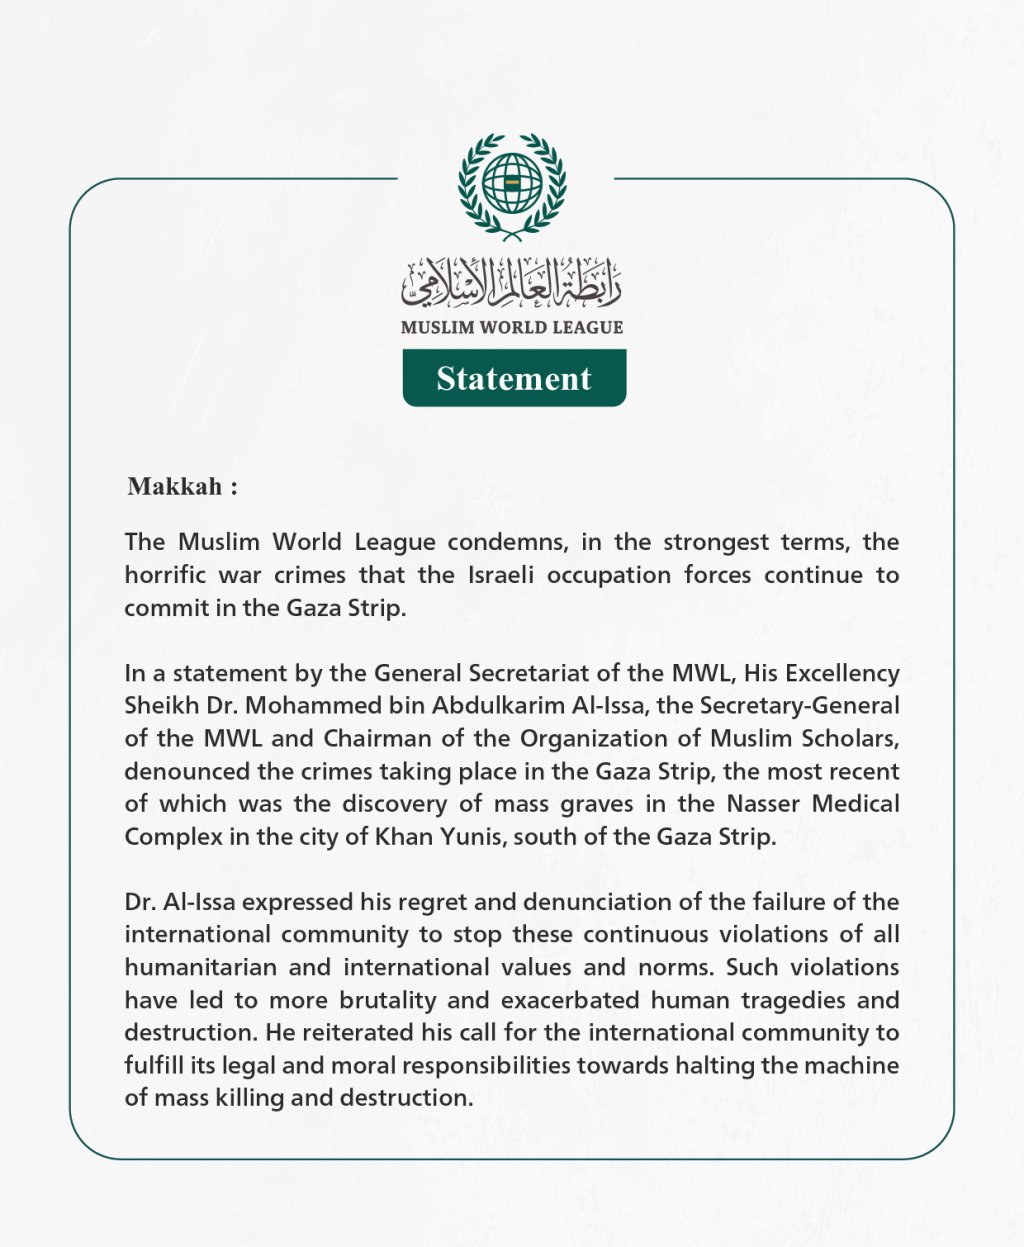 The Muslim World League condemns the Israeli occupation forces continuing to commit heinous war crimes in the Gaza Strip without deterrence